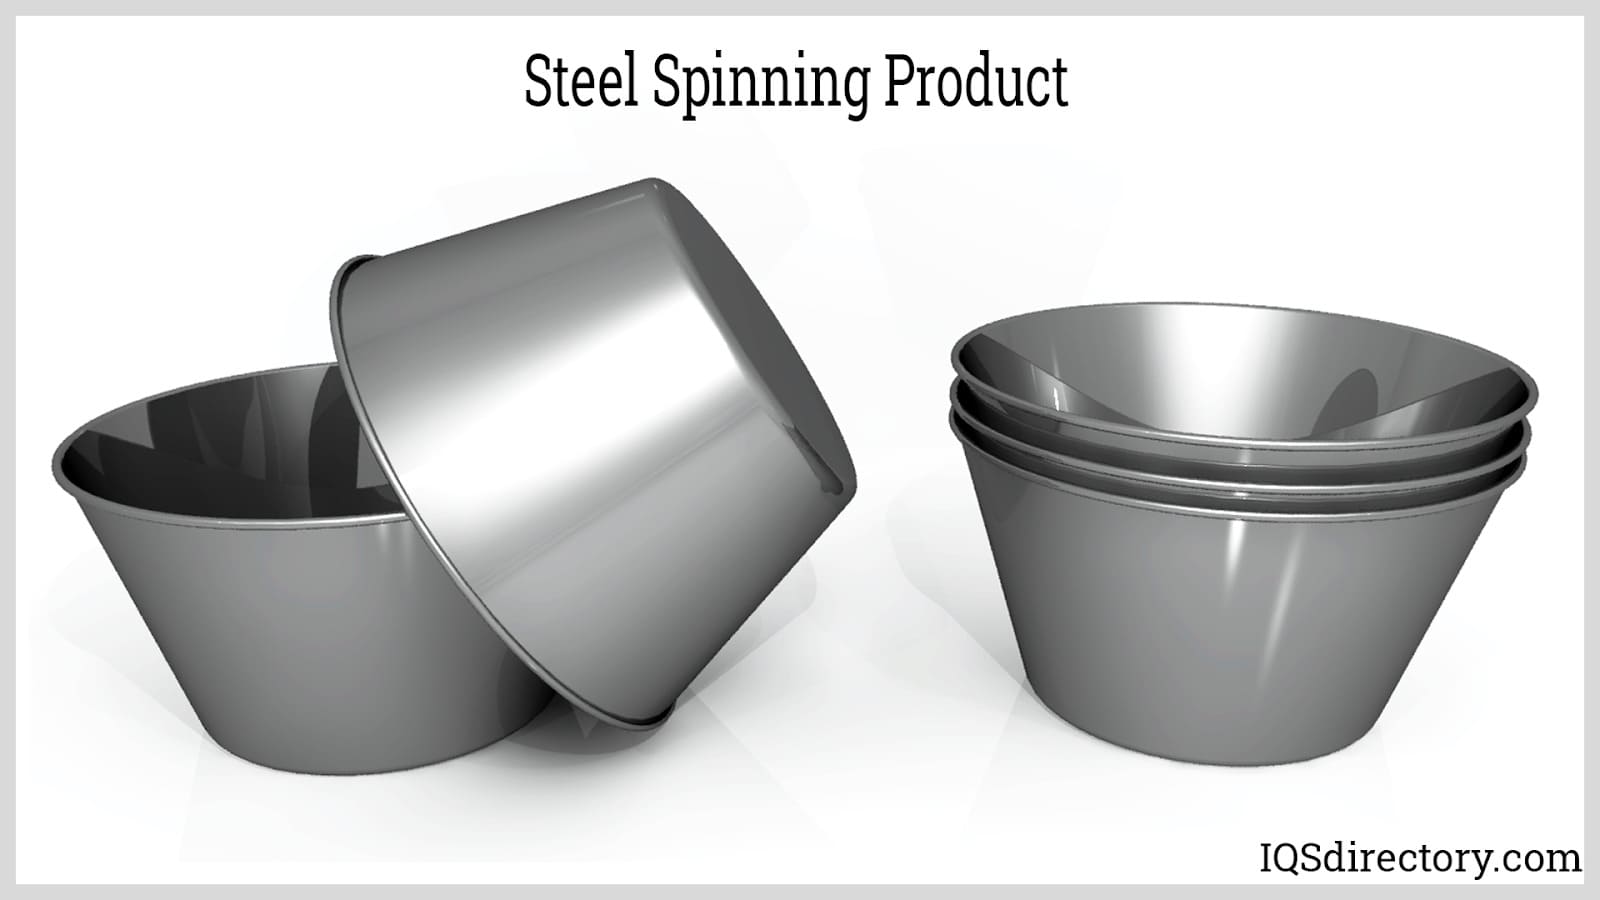 Steel Spinning Product